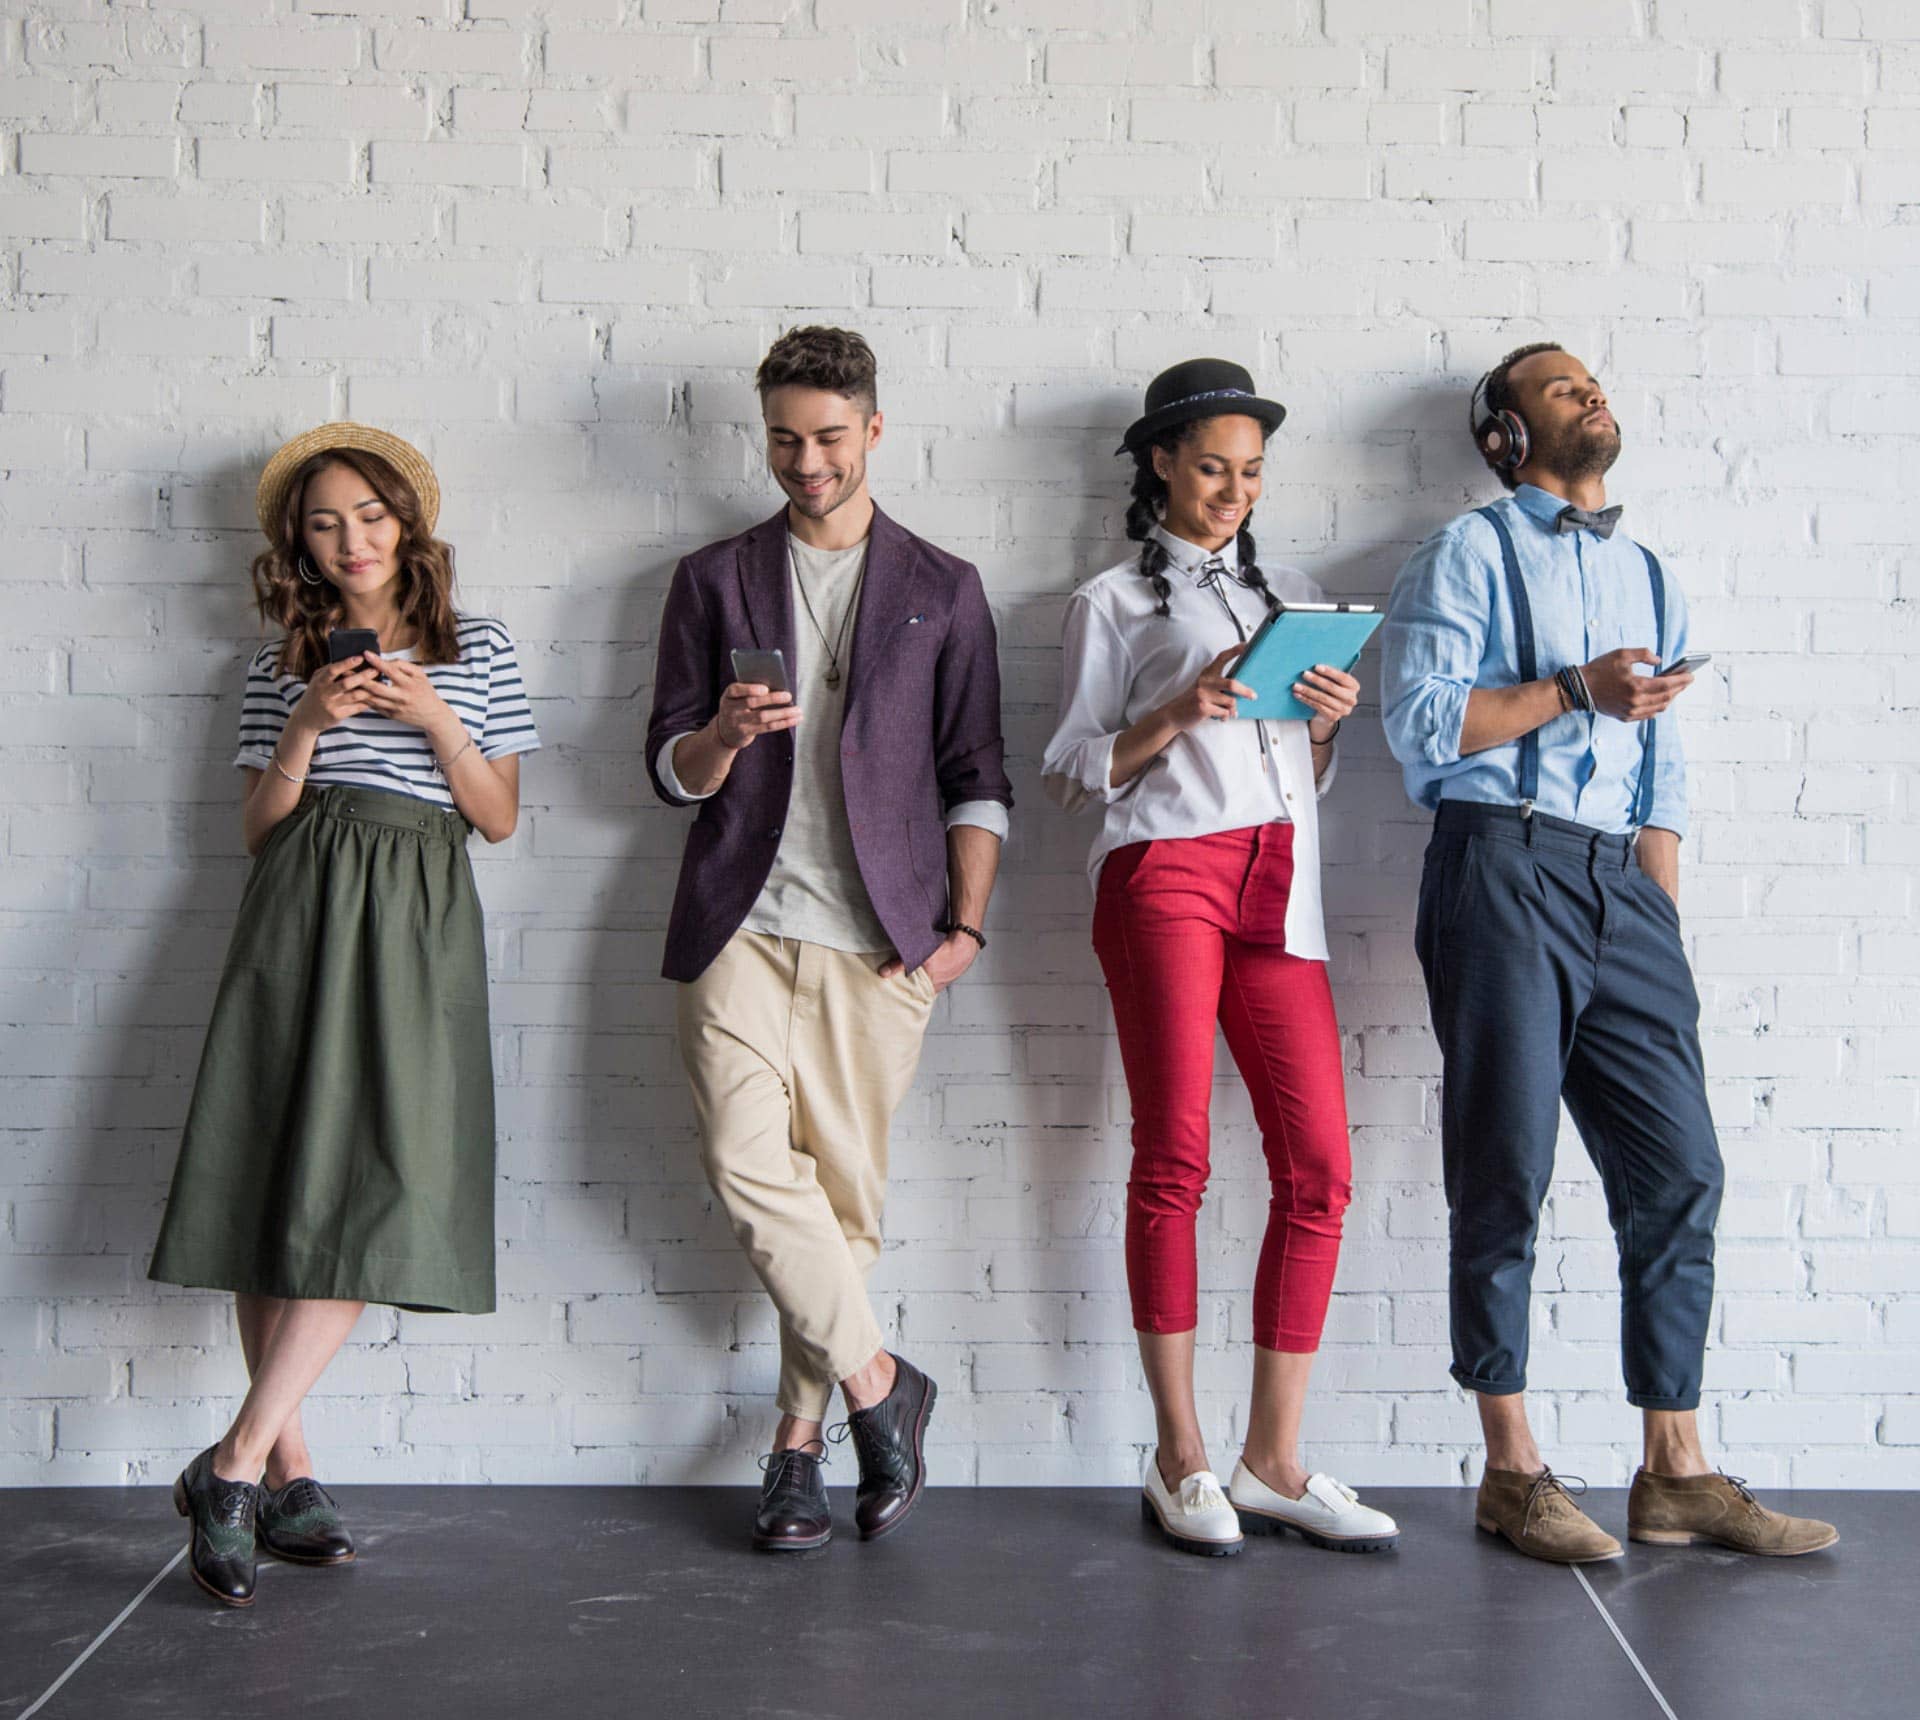 24 Millennial Stats Every Marketer Should Know